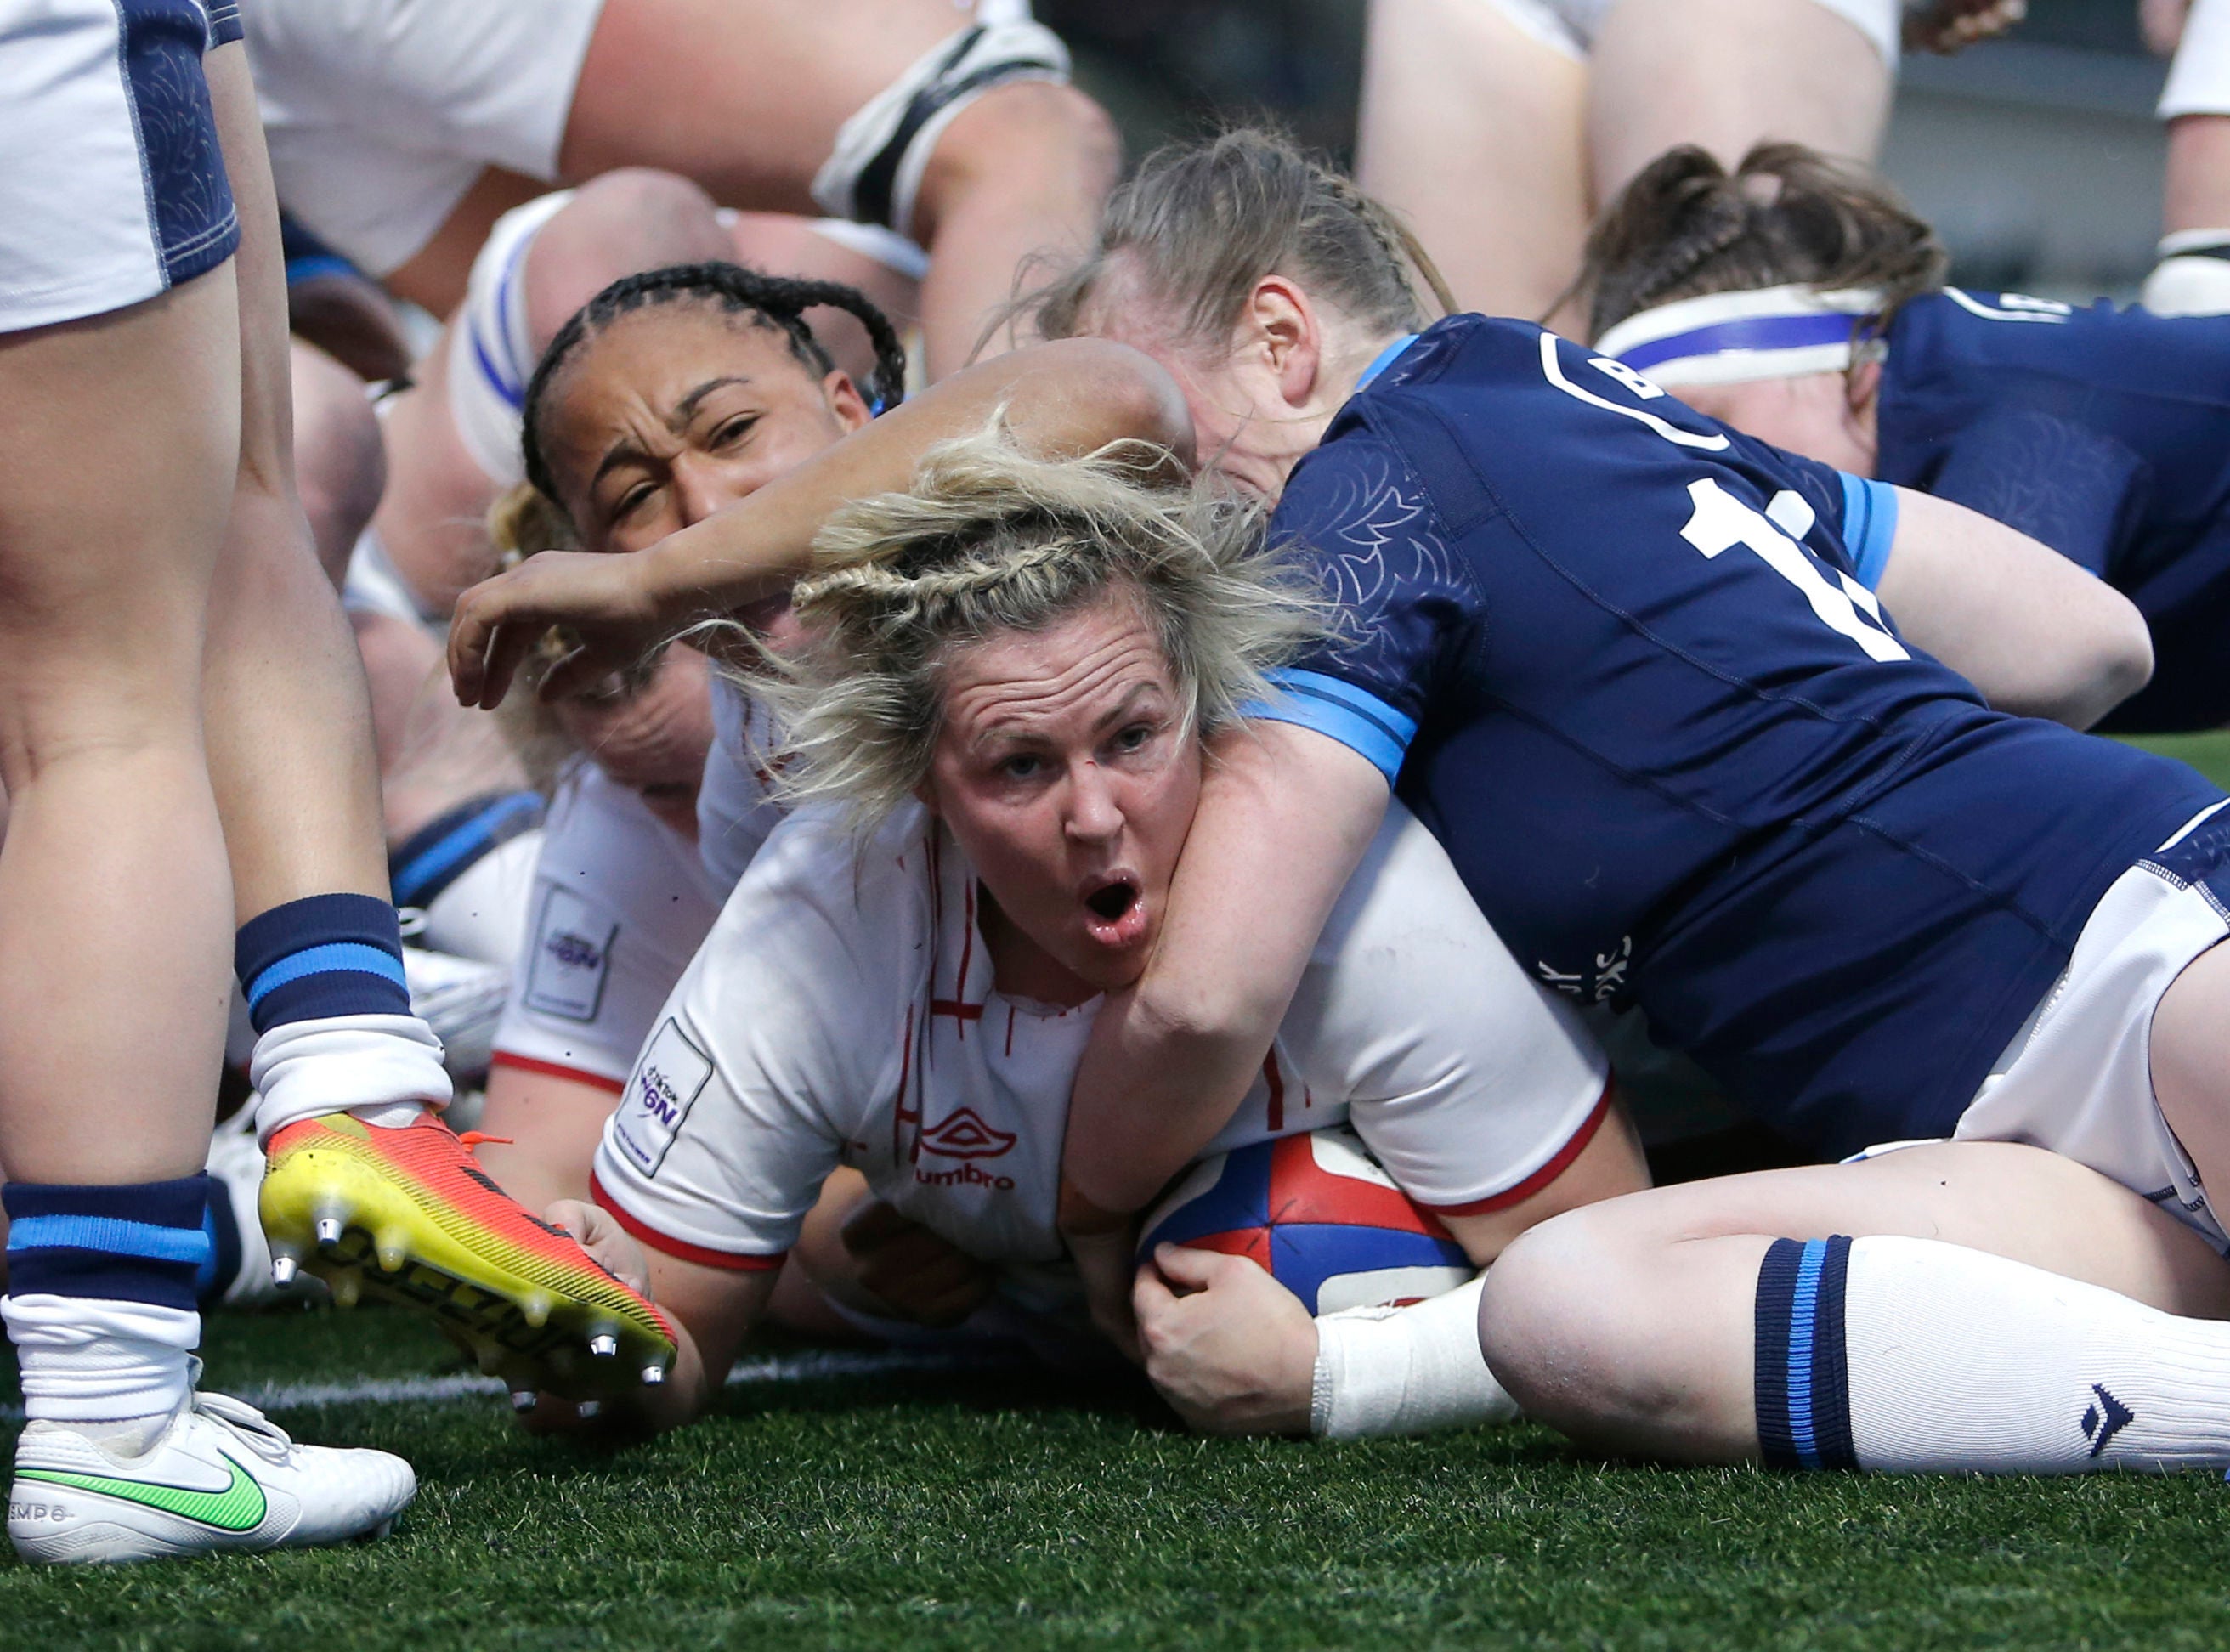 England remain unbeaten as they chase another Women’s Six Nations crown